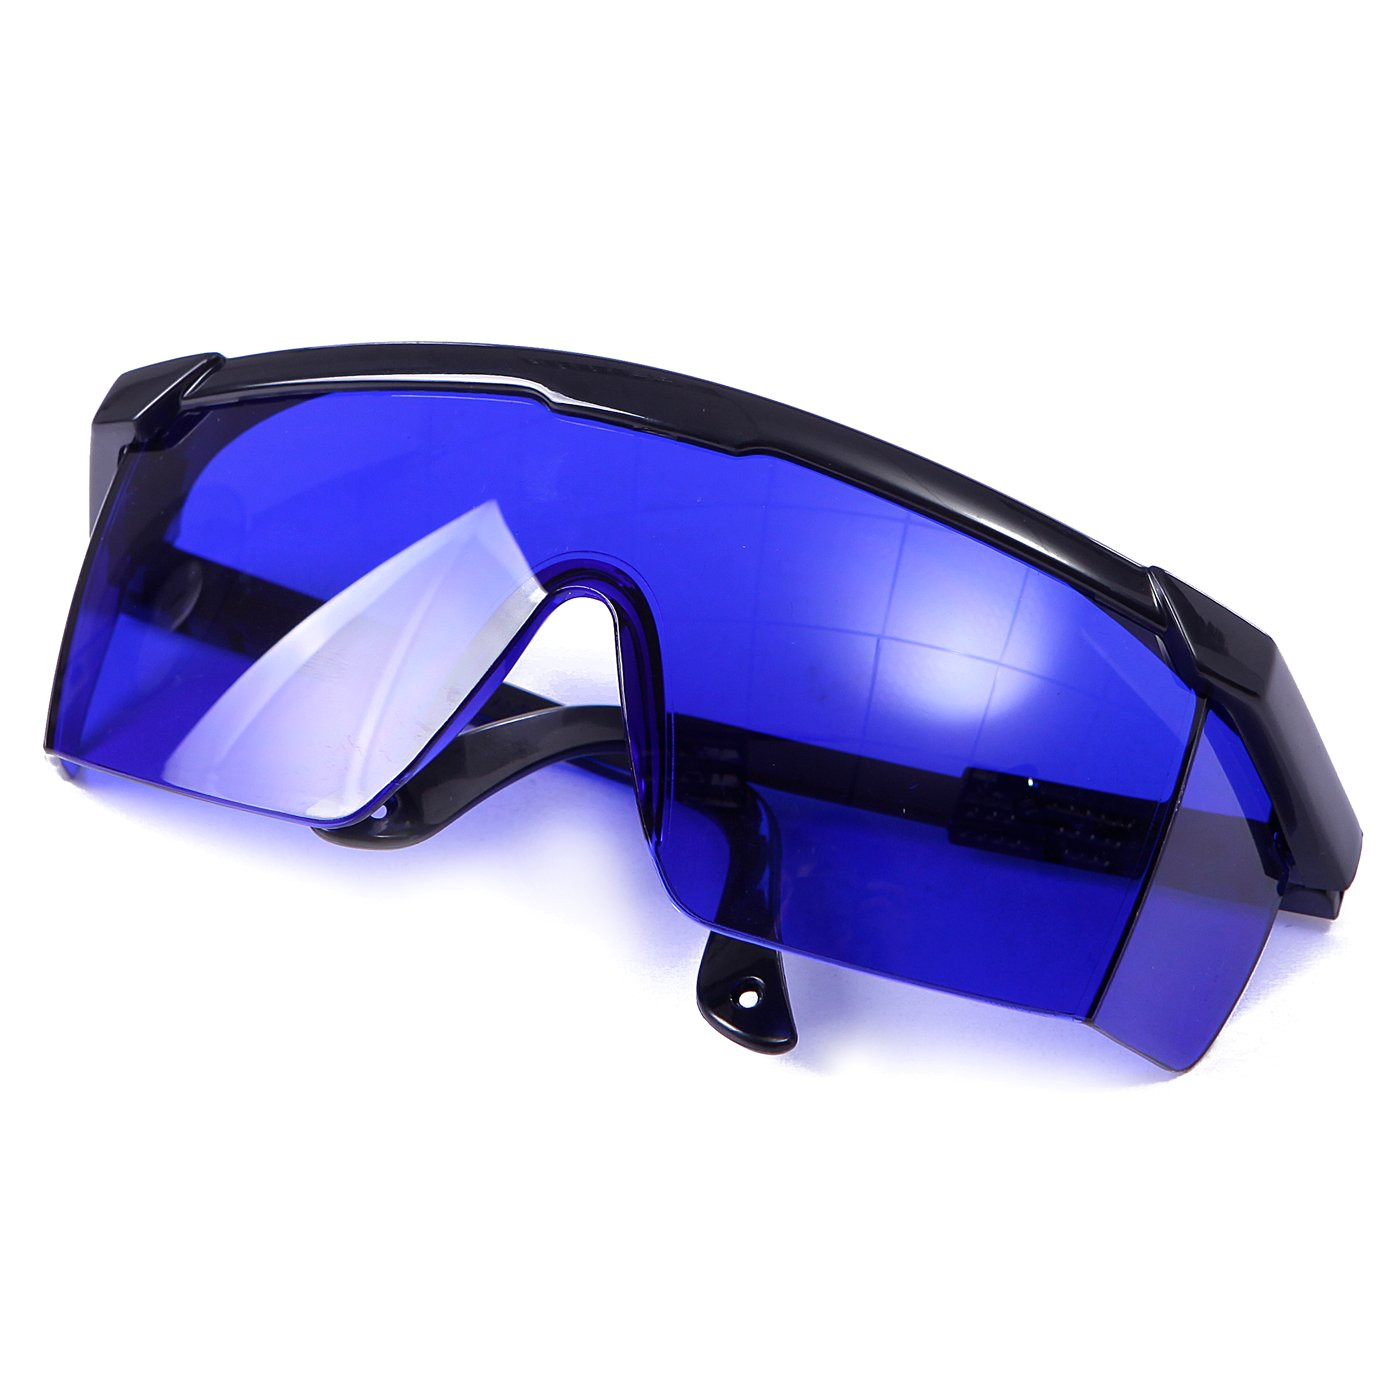 hde laser eye protection safety glasses for red and uv lasers with case blue amazon com